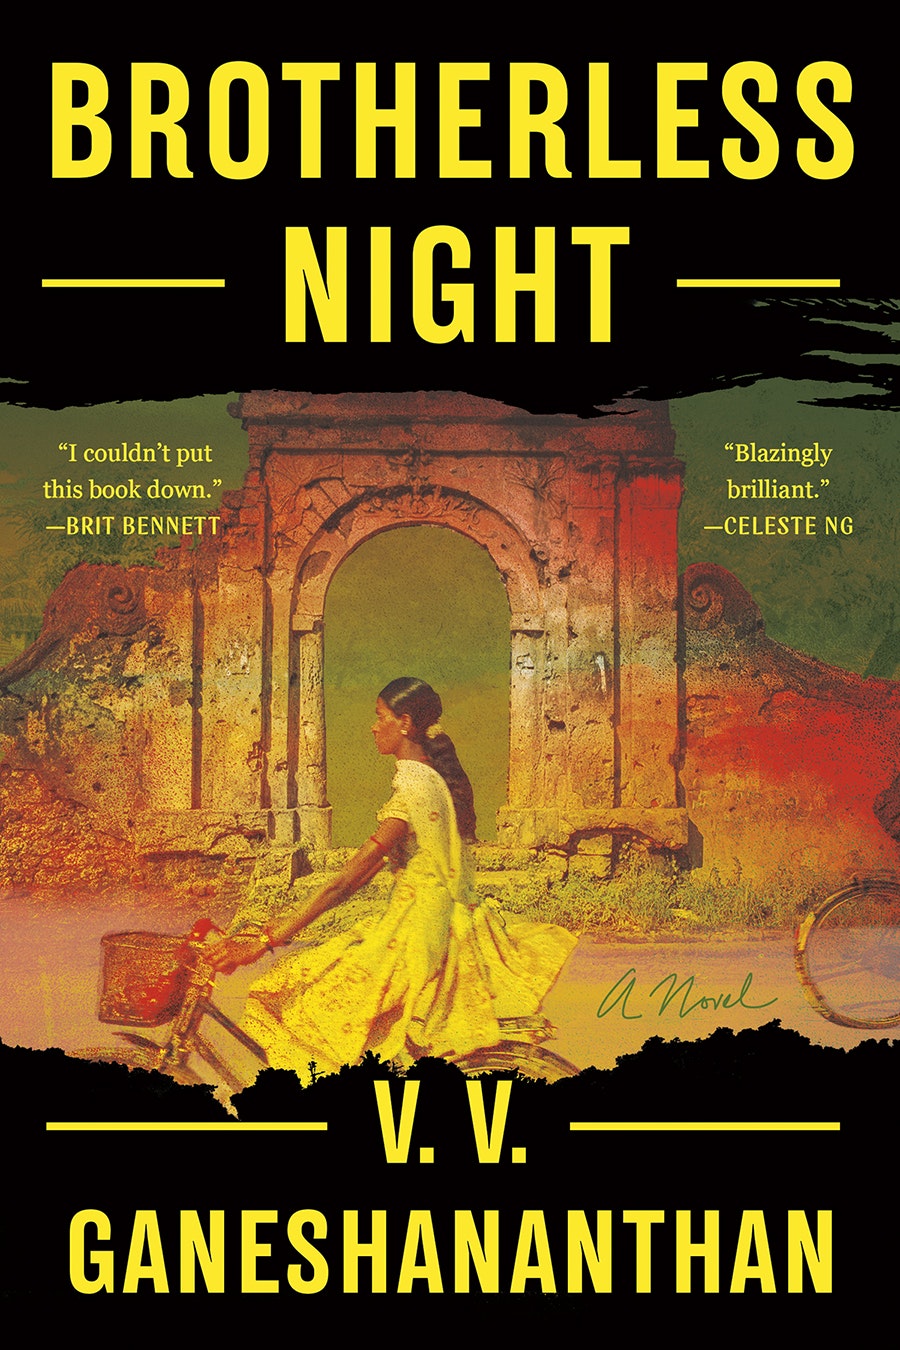 The cover of Ganeshgananthan's novel Brotherless Night, which shows an illustration of a girl with a long braid riding a bicycle